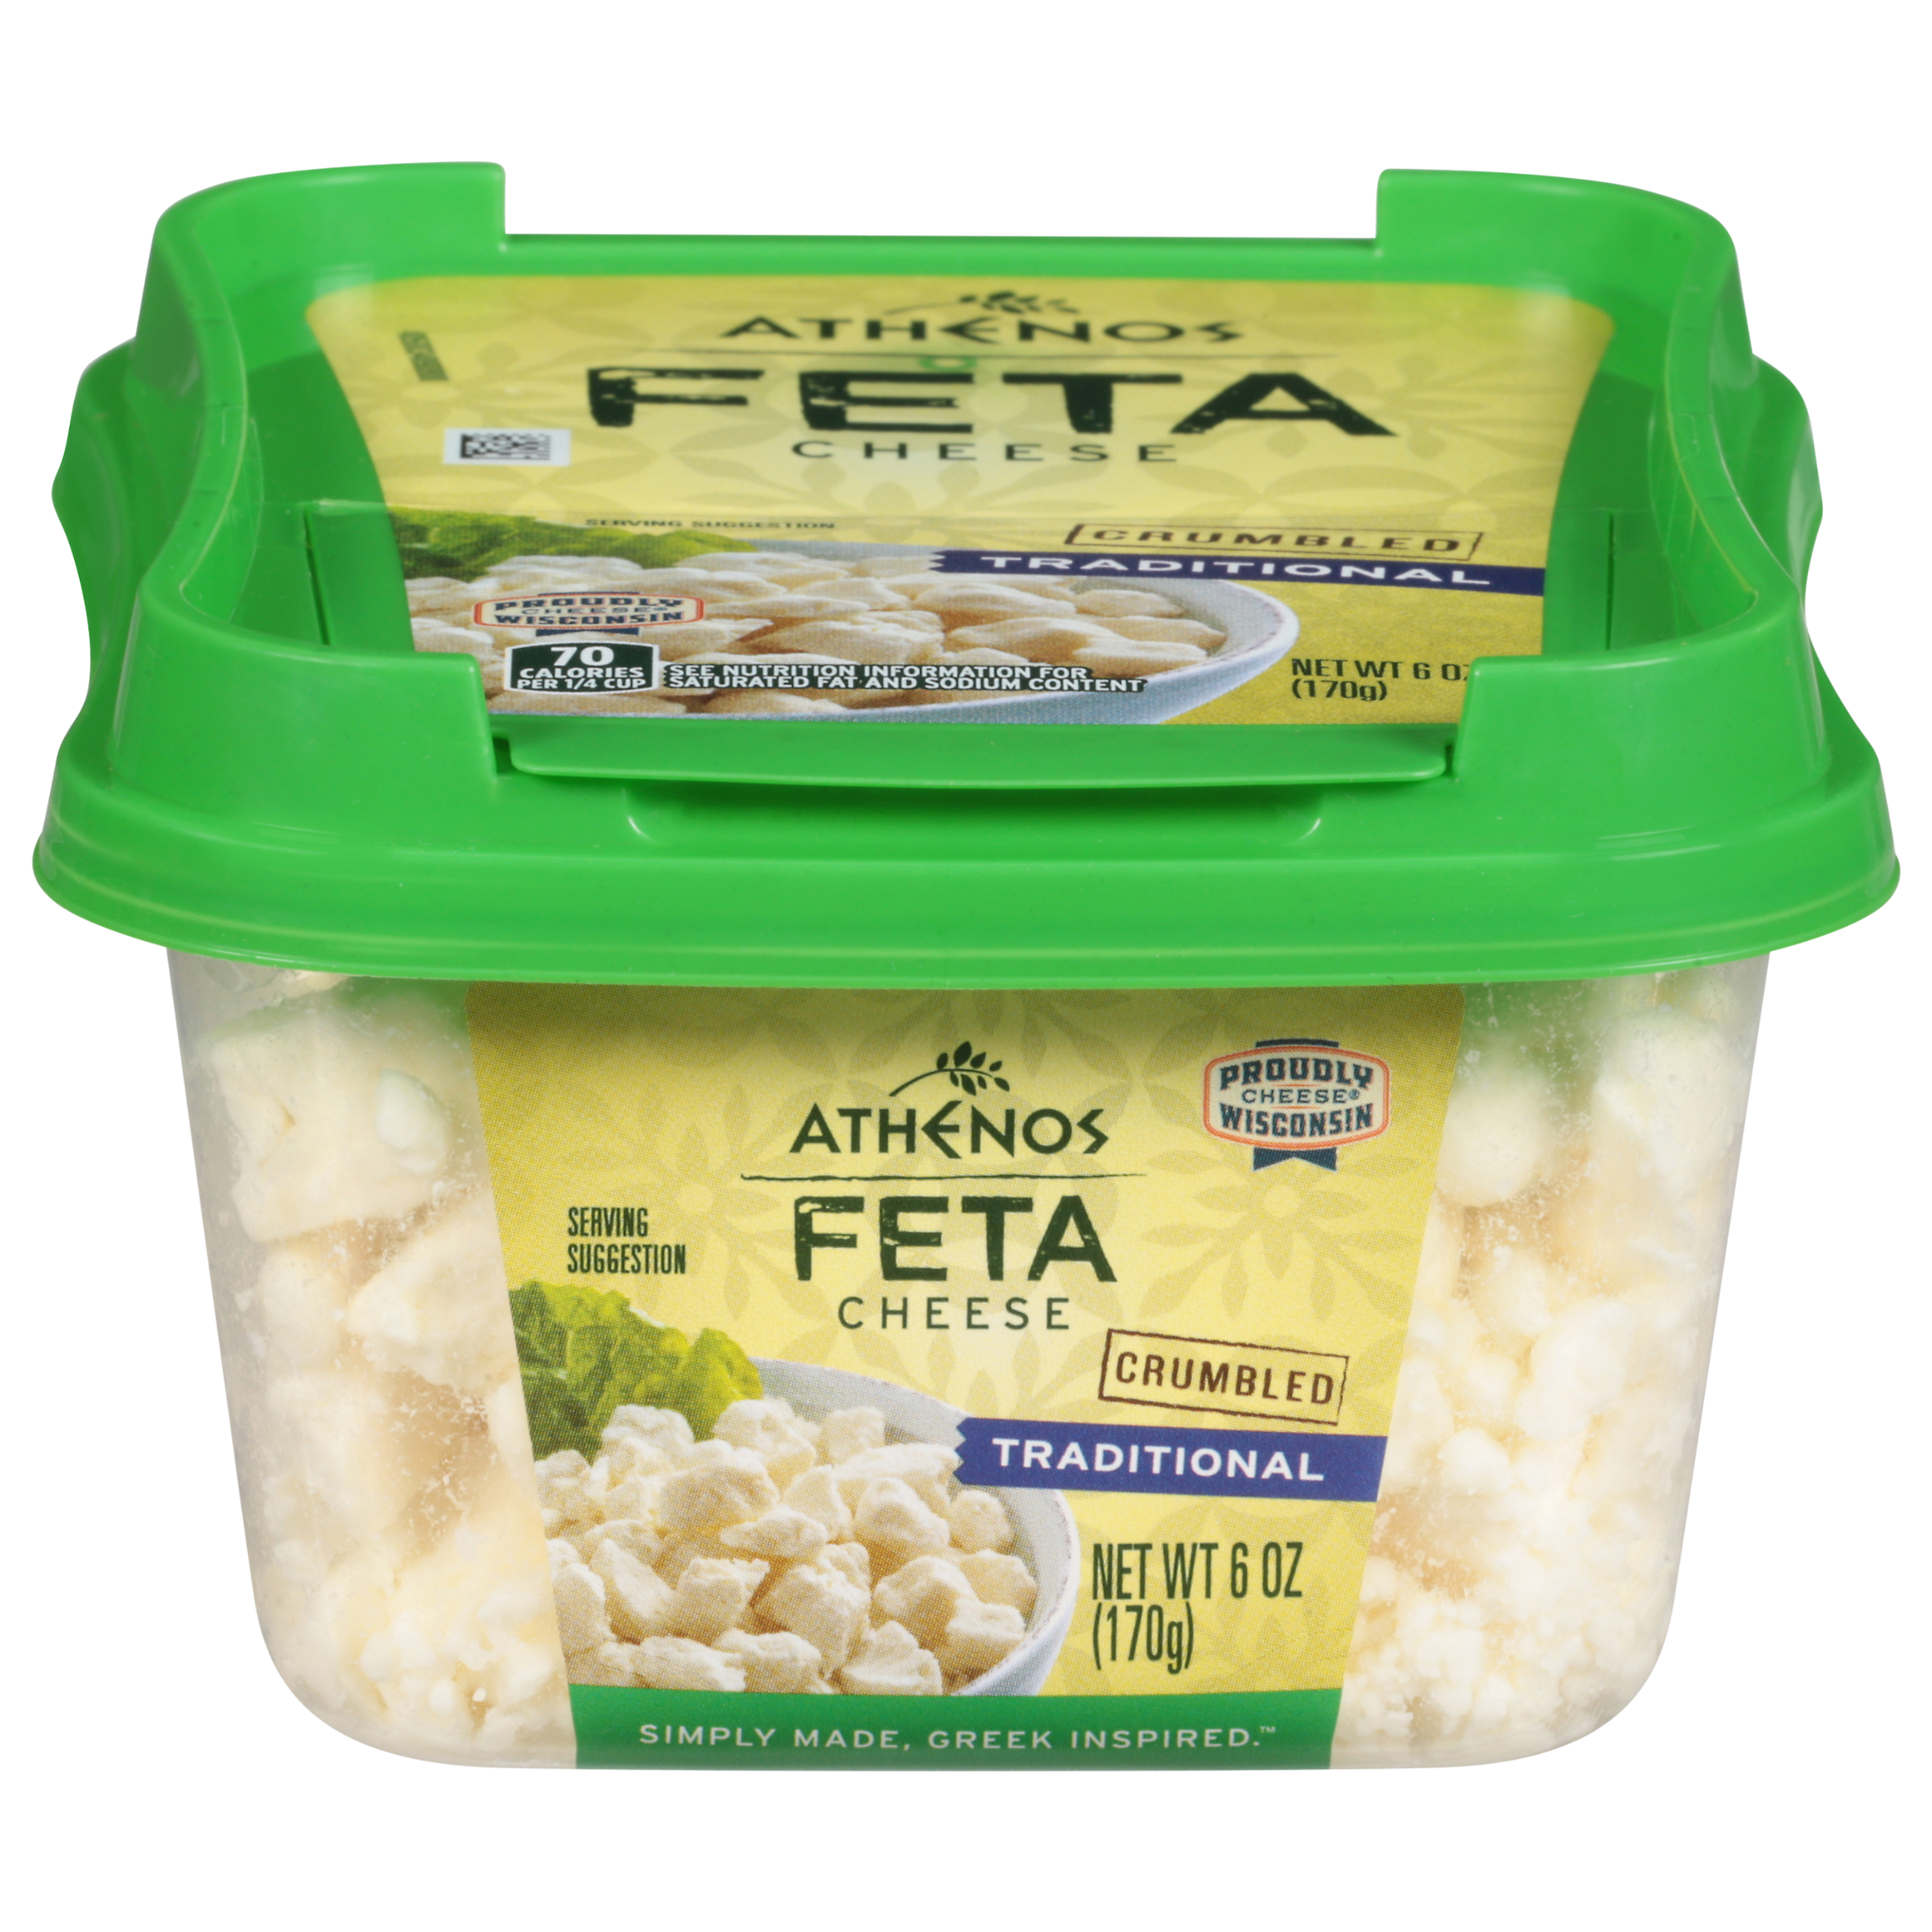 I. Introduction to Feta Cheese